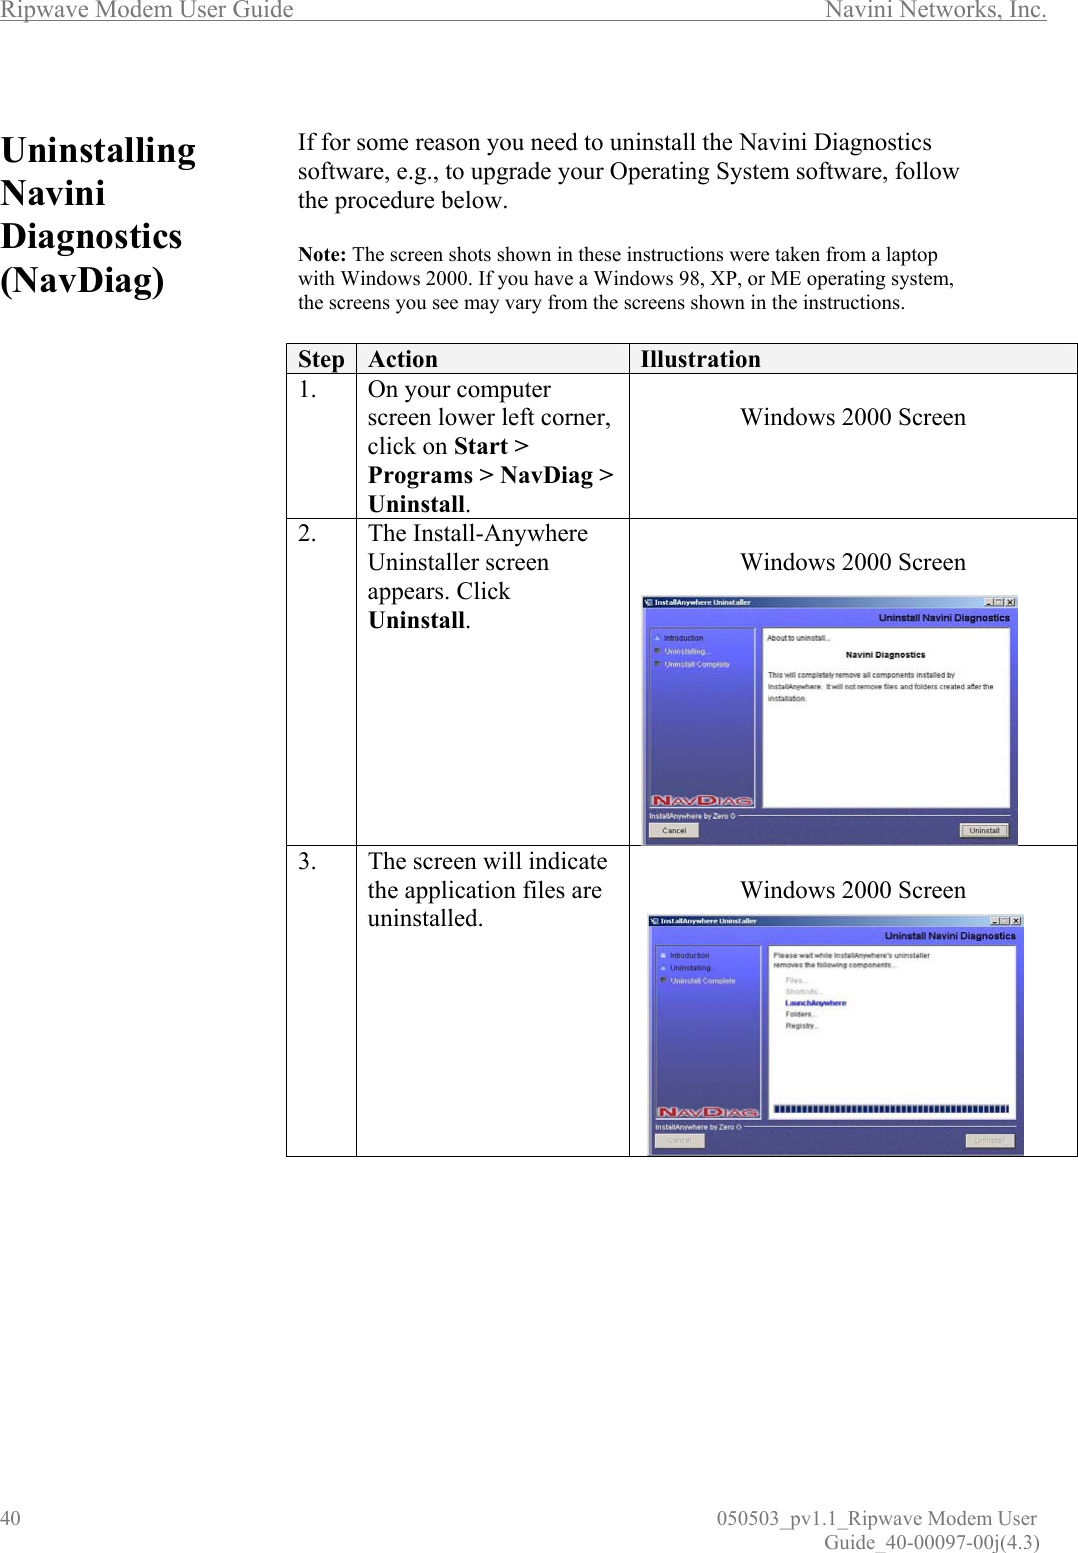 Ripwave Modem User Guide        Navini Networks, Inc. 40                          050503_pv1.1_Ripwave Modem User                                                                                                                                                               Guide_40-00097-00j(4.3)  Uninstalling Navini Diagnostics (NavDiag)                                         If for some reason you need to uninstall the Navini Diagnostics software, e.g., to upgrade your Operating System software, follow the procedure below.   Note: The screen shots shown in these instructions were taken from a laptop with Windows 2000. If you have a Windows 98, XP, or ME operating system, the screens you see may vary from the screens shown in the instructions.  Step  Action  Illustration 1.  On your computer screen lower left corner, click on Start &gt; Programs &gt; NavDiag &gt; Uninstall.  Windows 2000 Screen  2. The Install-Anywhere Uninstaller screen appears. Click Uninstall.  Windows 2000 Screen  3.  The screen will indicate the application files are uninstalled.  Windows 2000 Screen   